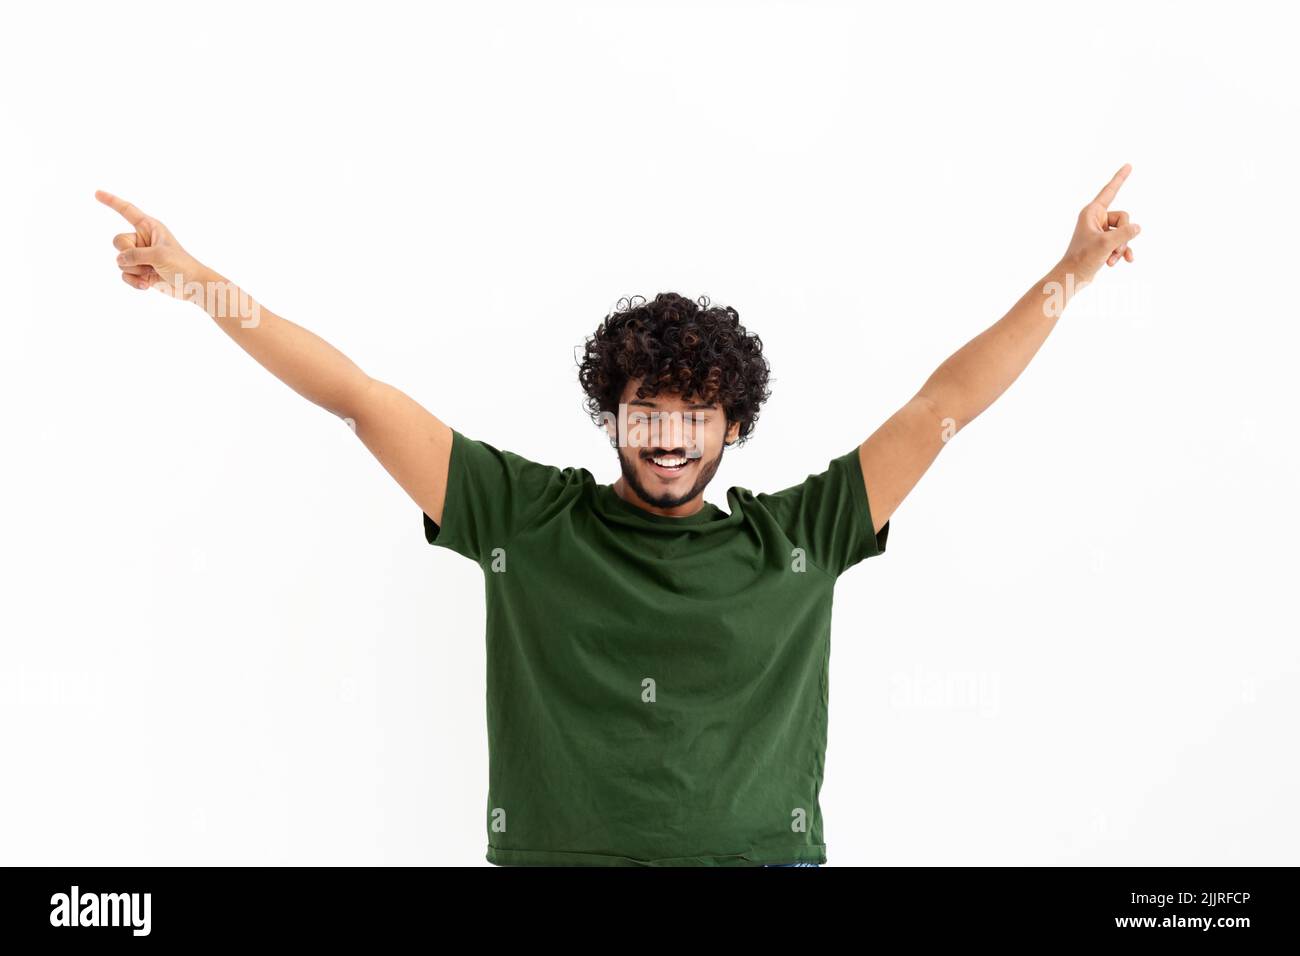 Portrait of happy young Asian man with curly hair celebrating victory raised his hands up on white background Stock Photo